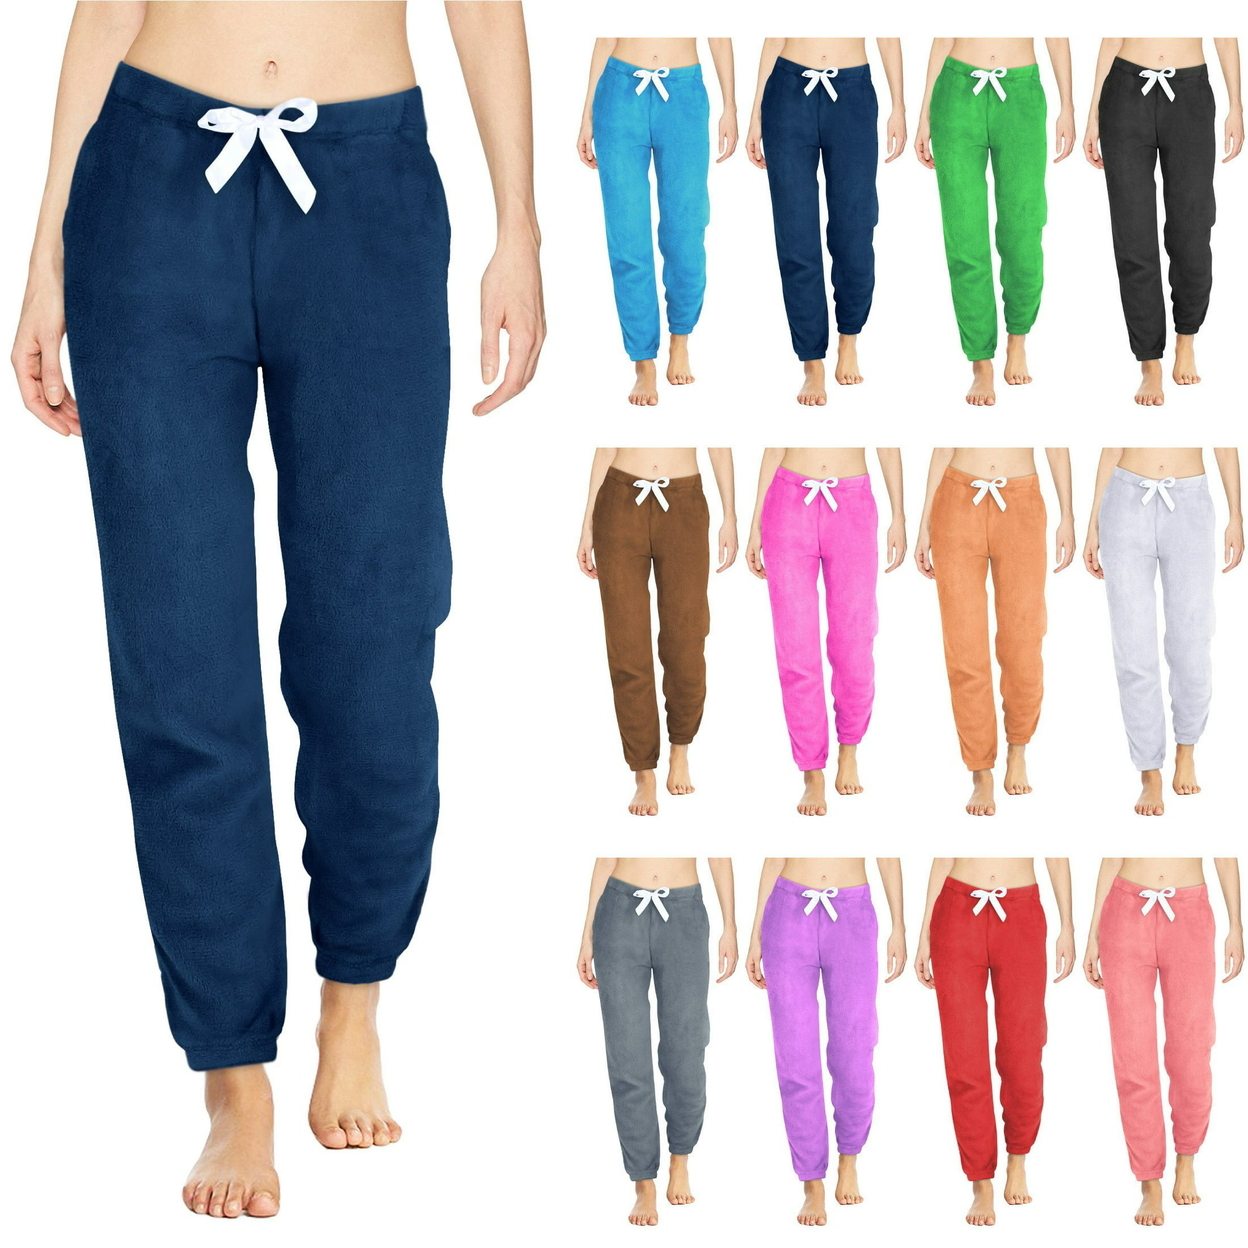 Multi-Pack: Women's Solid & Printed Ultra-Soft Comfy Stretch Micro-Fleece Pajama Lounge Pants - 1-pack, Large, Solid